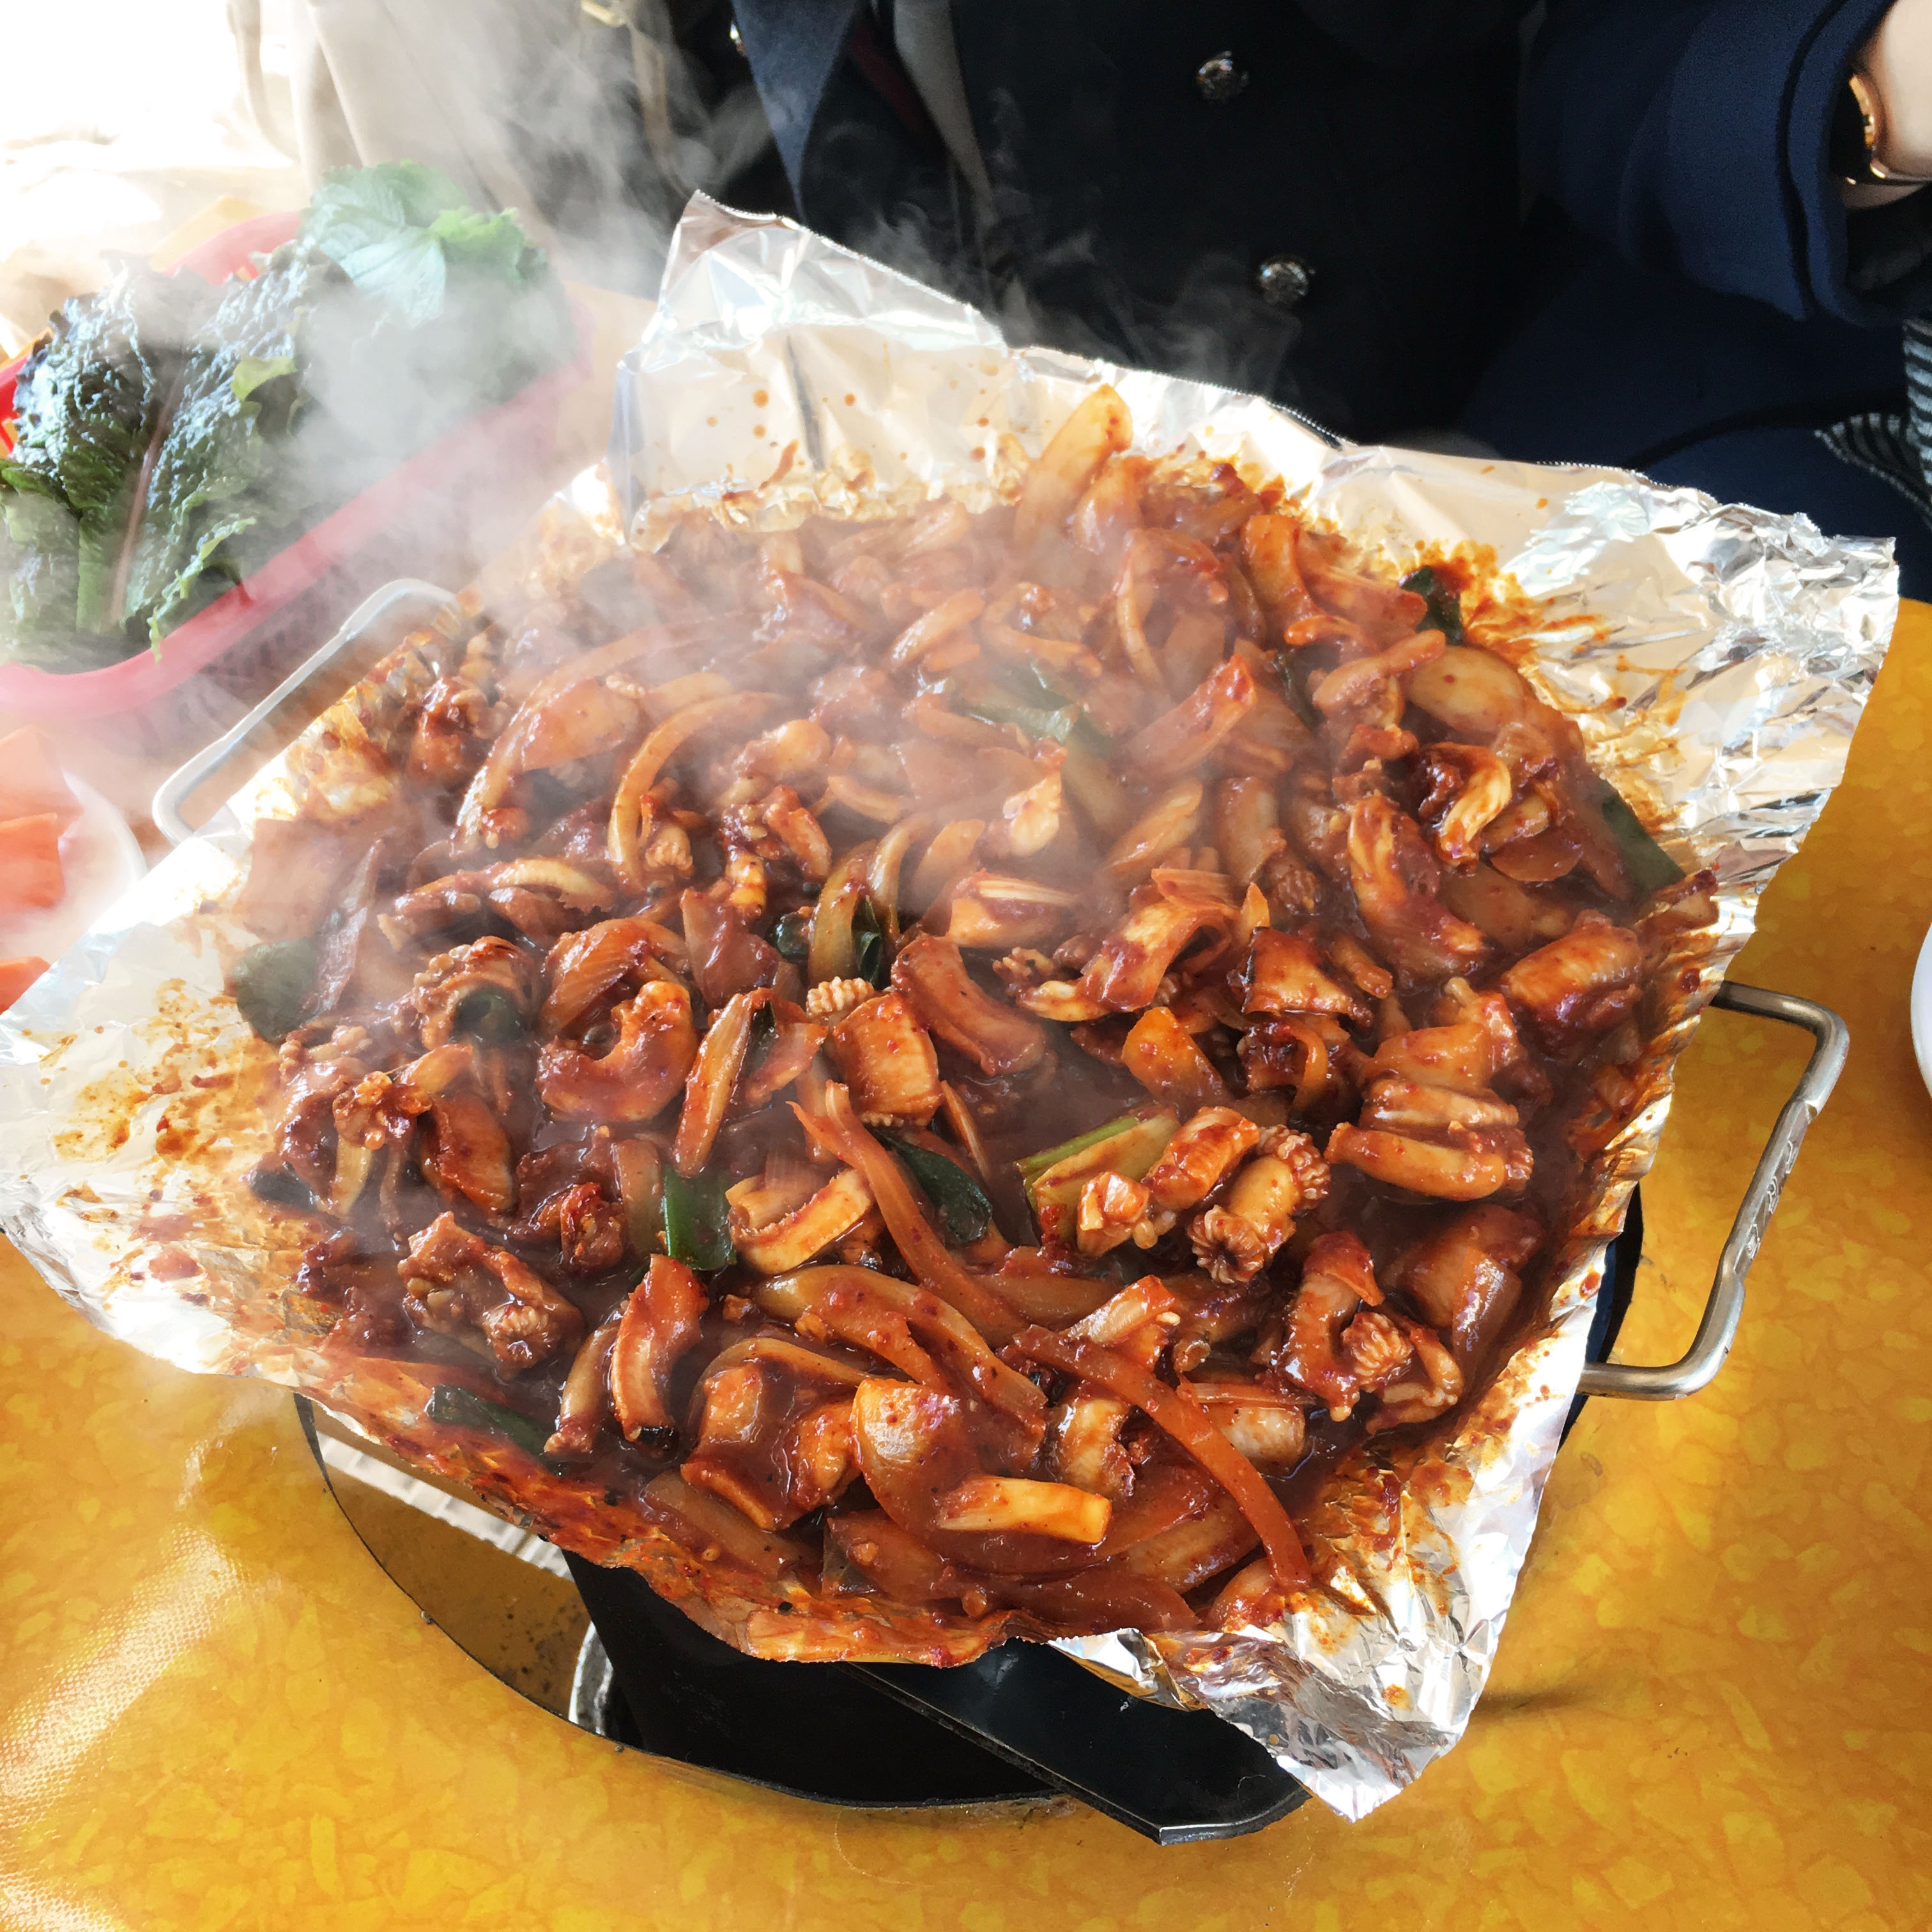 Sweet and spicy sotong at one of the streetside vendors in Jagalchi Fish Market.